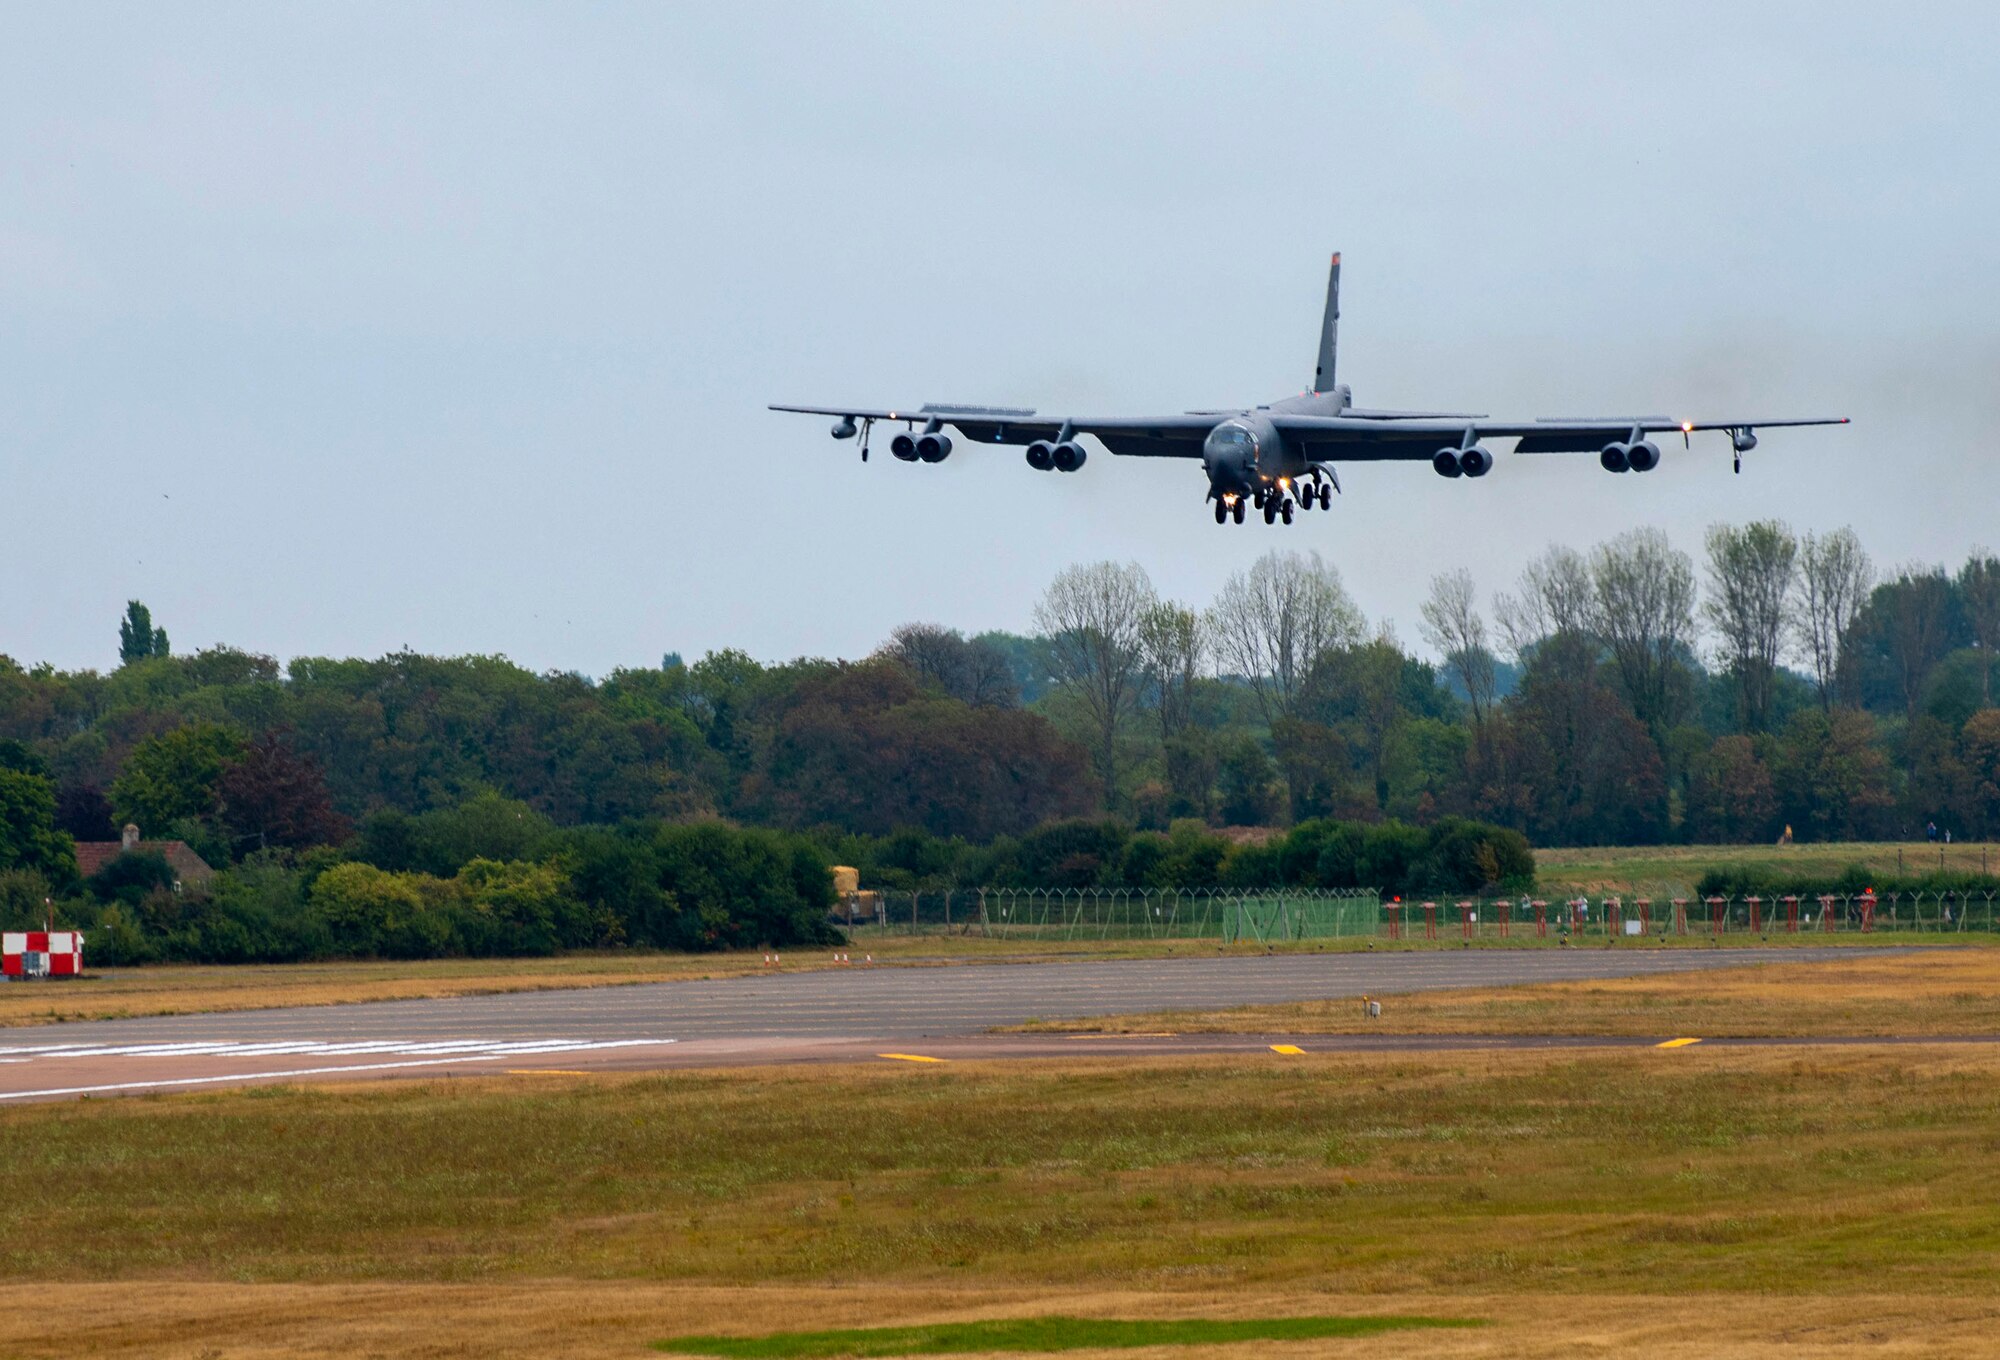 A U.S. Air Force B-52 Stratofortress aircraft, assigned to the 23rd Expeditionary Bomb Squadron, approaches for landing at RAF Fairford